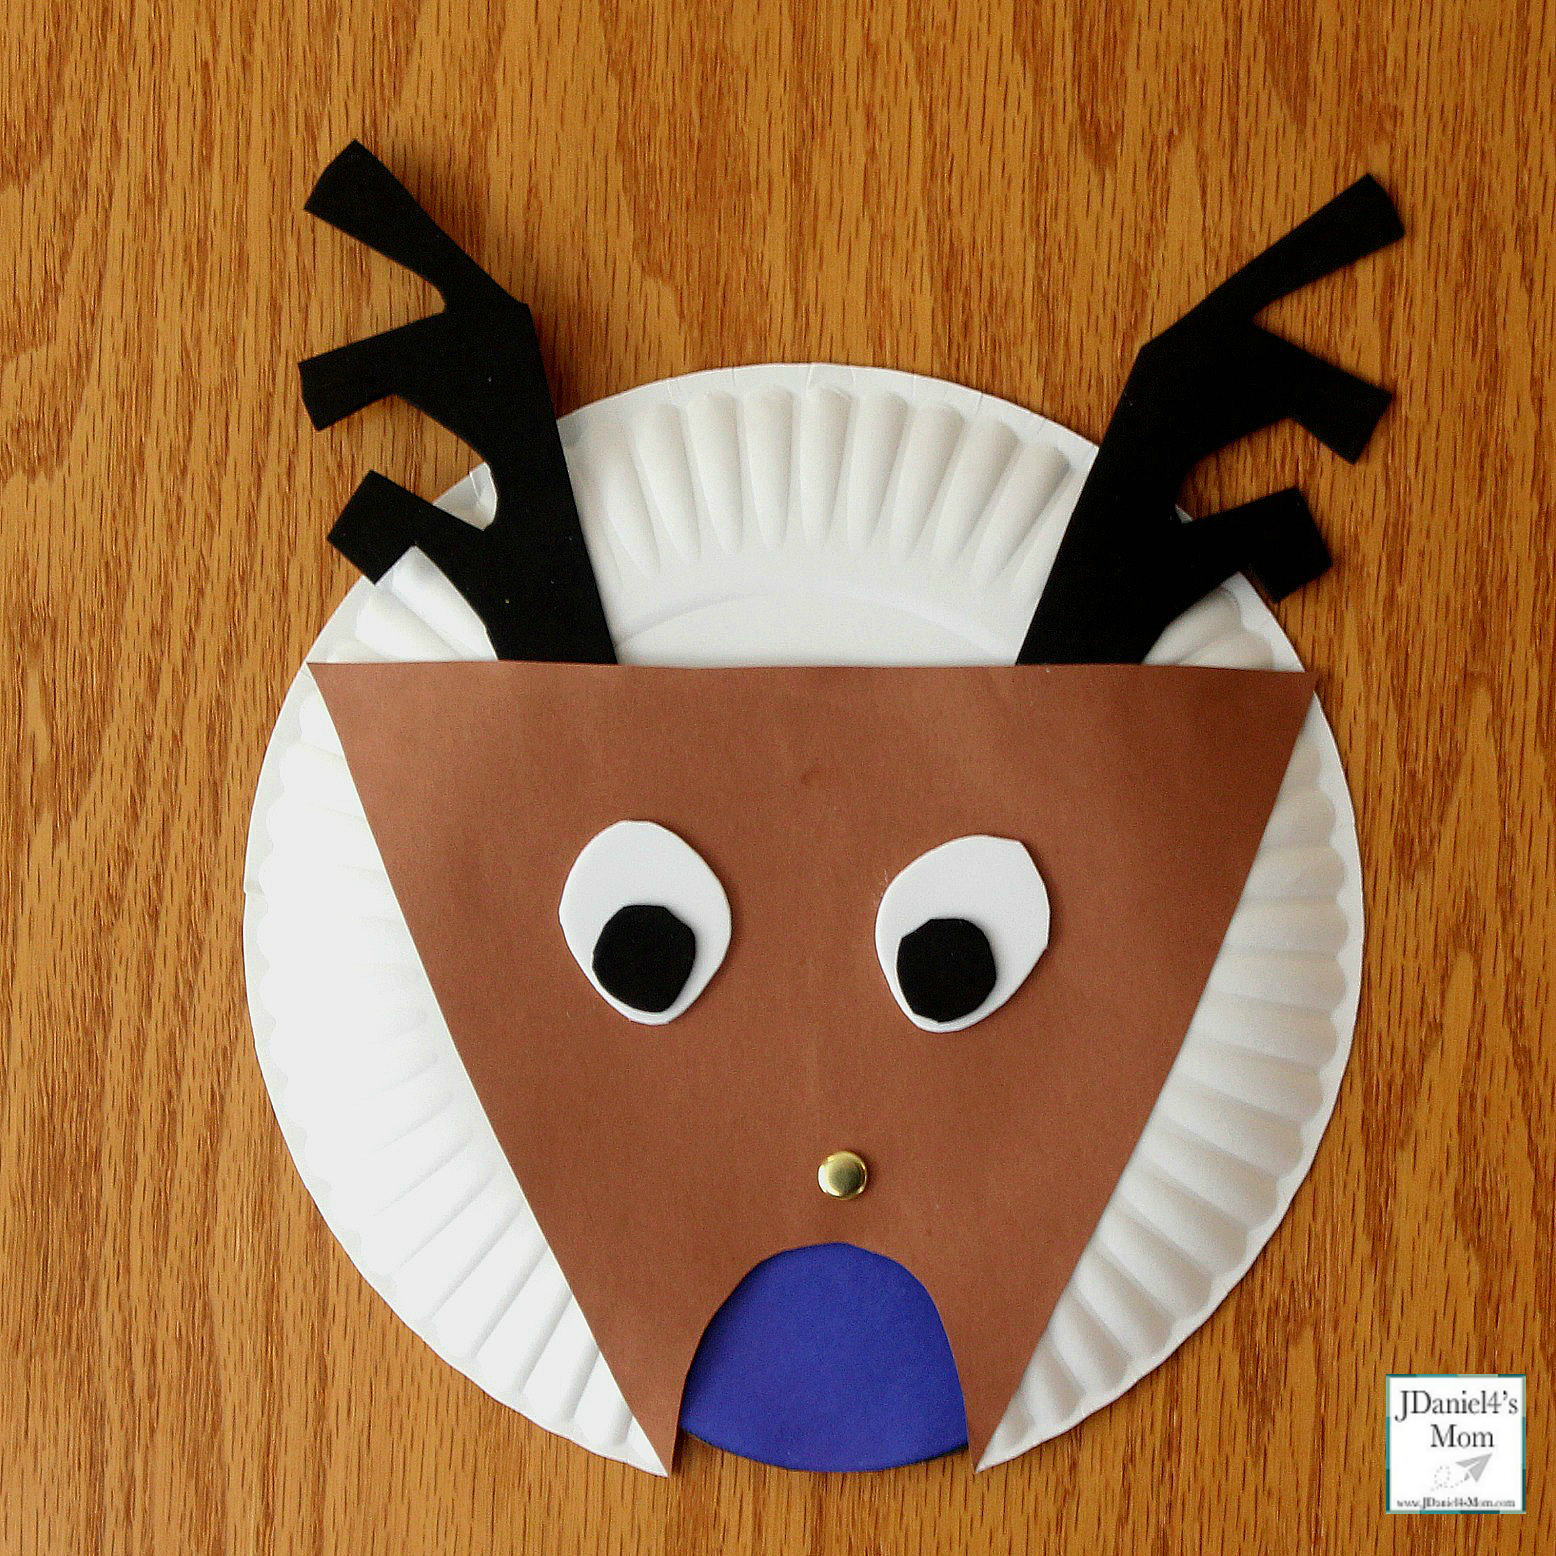 Changing the Color of the Reindeer's Nose Color Activity - Homemade Reindeer with a Blue Nose